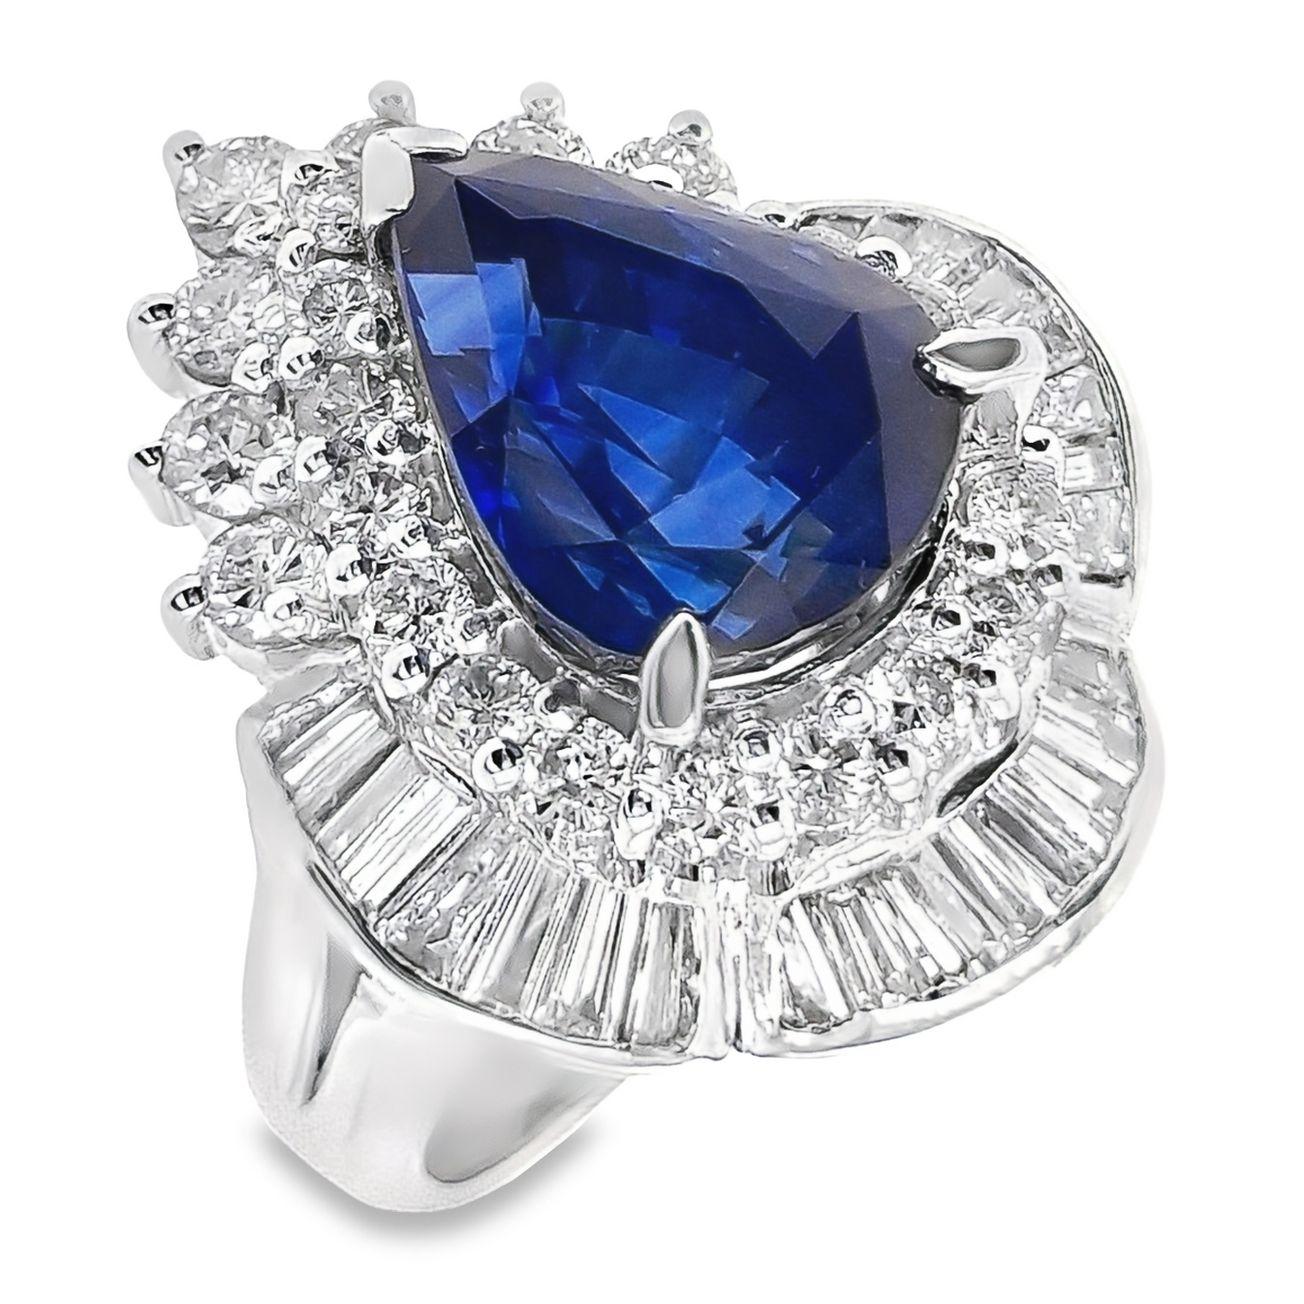 Step into a world of unparalleled luxury with this platinum ring, graced by a 5.79ct Natural Kashmir Sapphire Vivid Blue and accompanied by 1.73ct Natural Diamonds. This masterpiece features a pear mixed-cut sapphire of Kashmir origin, renowned for